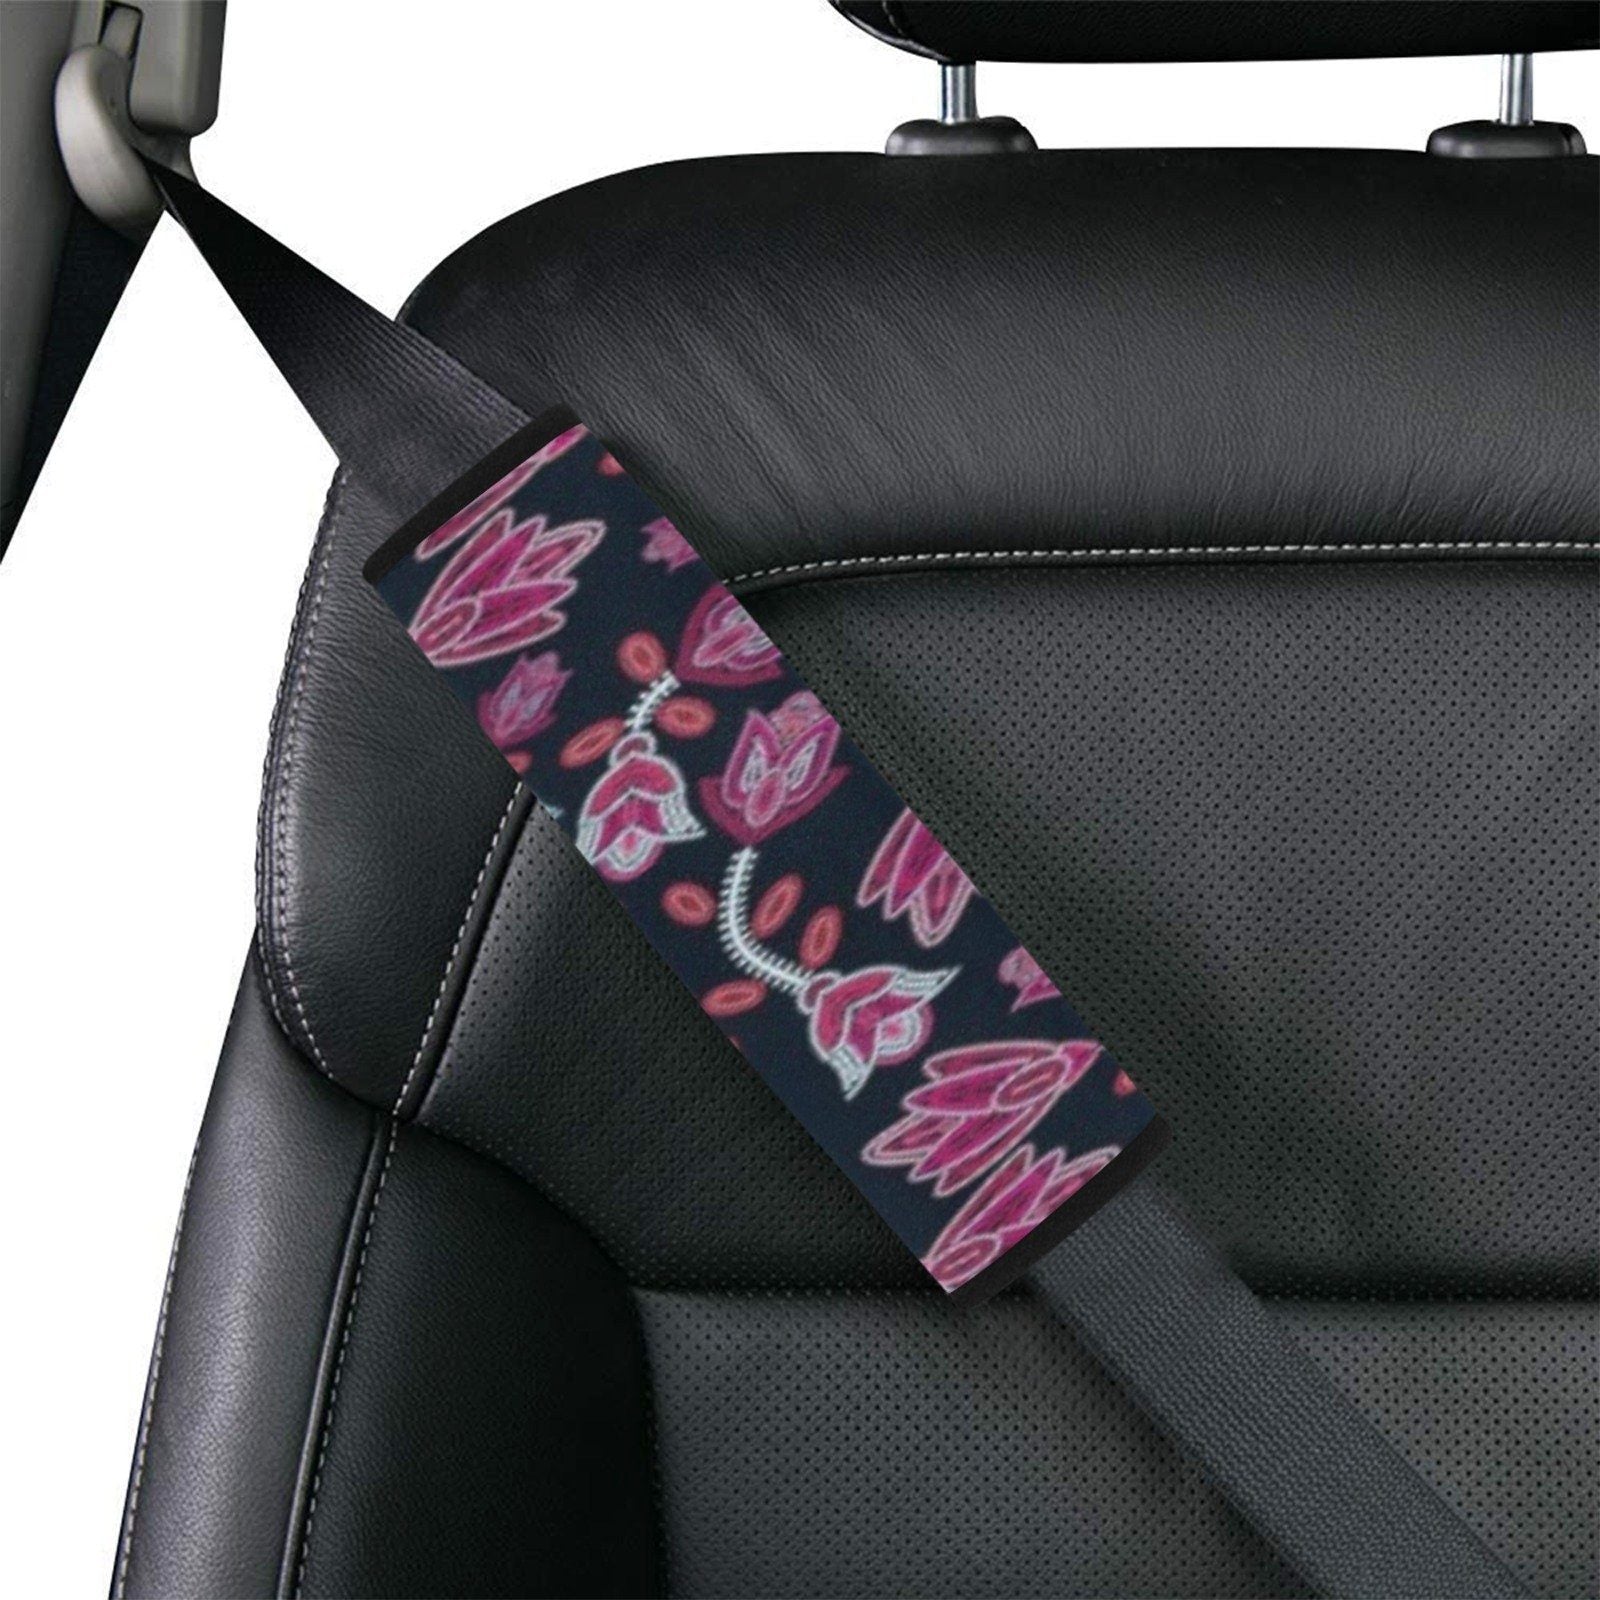 Beaded Pink Car Seat Belt Cover 7''x12.6'' (Pack of 2) Car Seat Belt Cover 7x12.6 (Pack of 2) e-joyer 